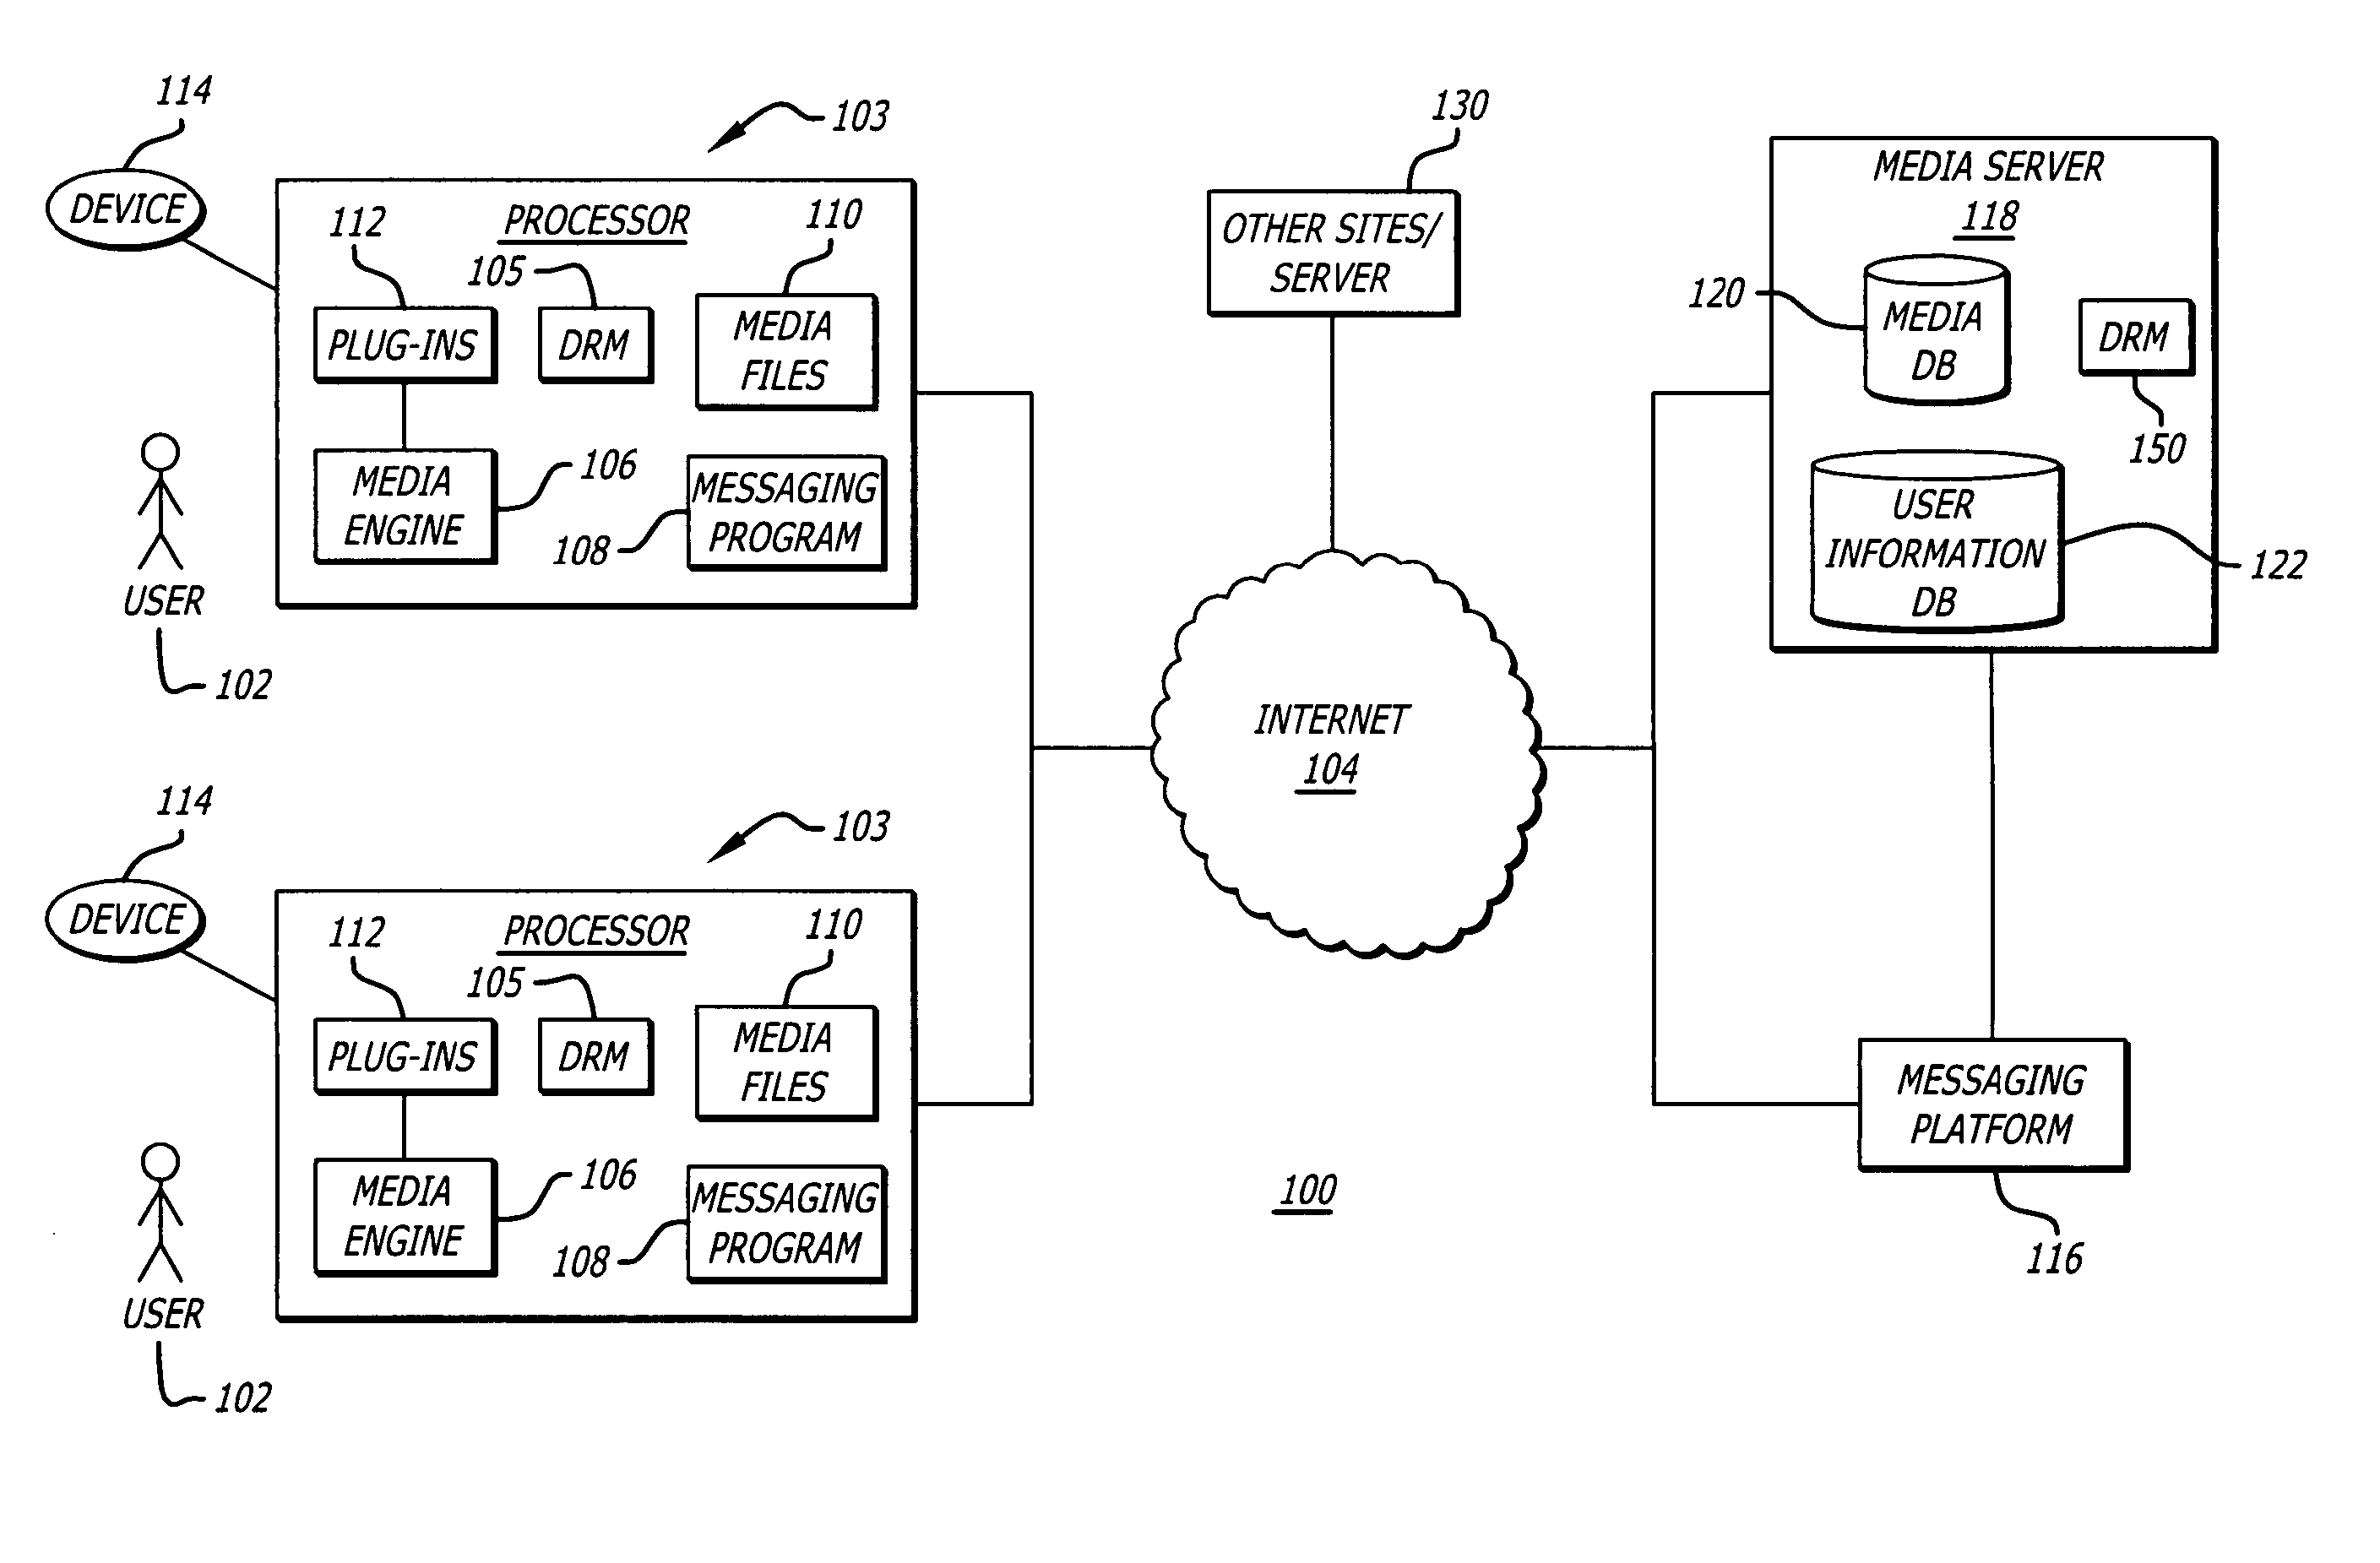 Method and system for generating affinity based playlists